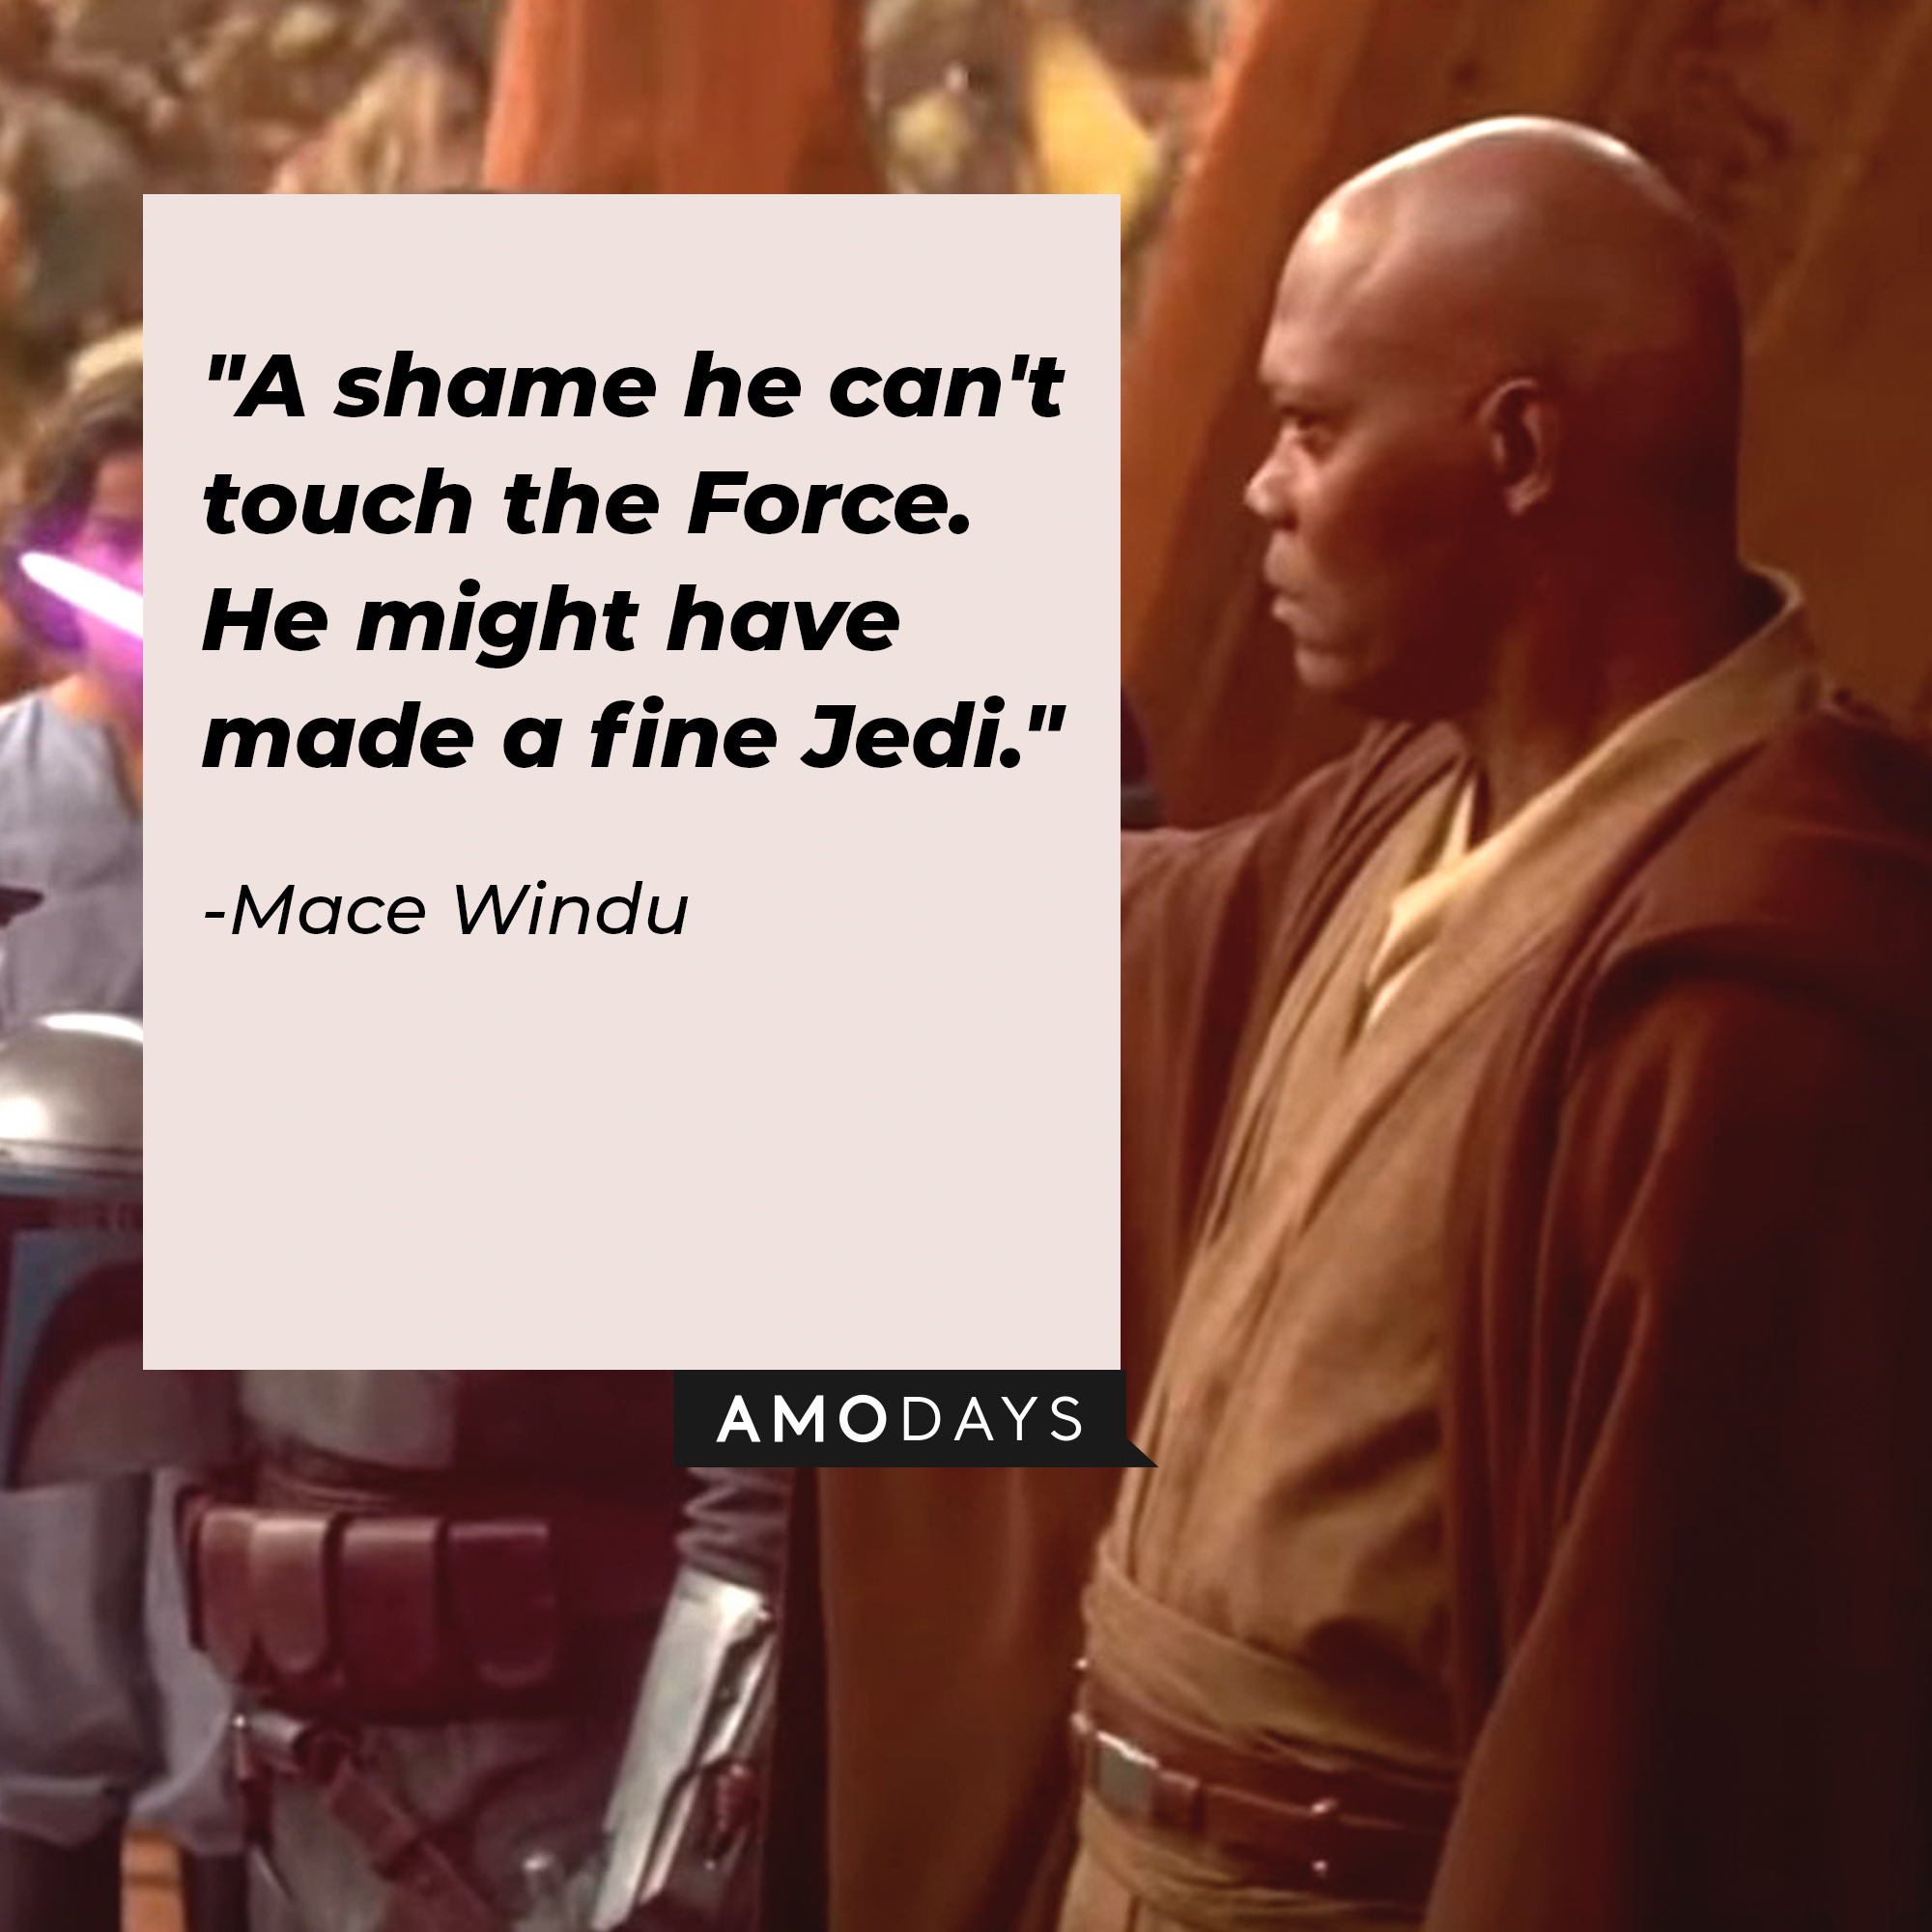 Mace Windu's quote: "A shame he can't touch the Force. He might have made a fine Jedi." | Image: Facebook / StarWars.UK